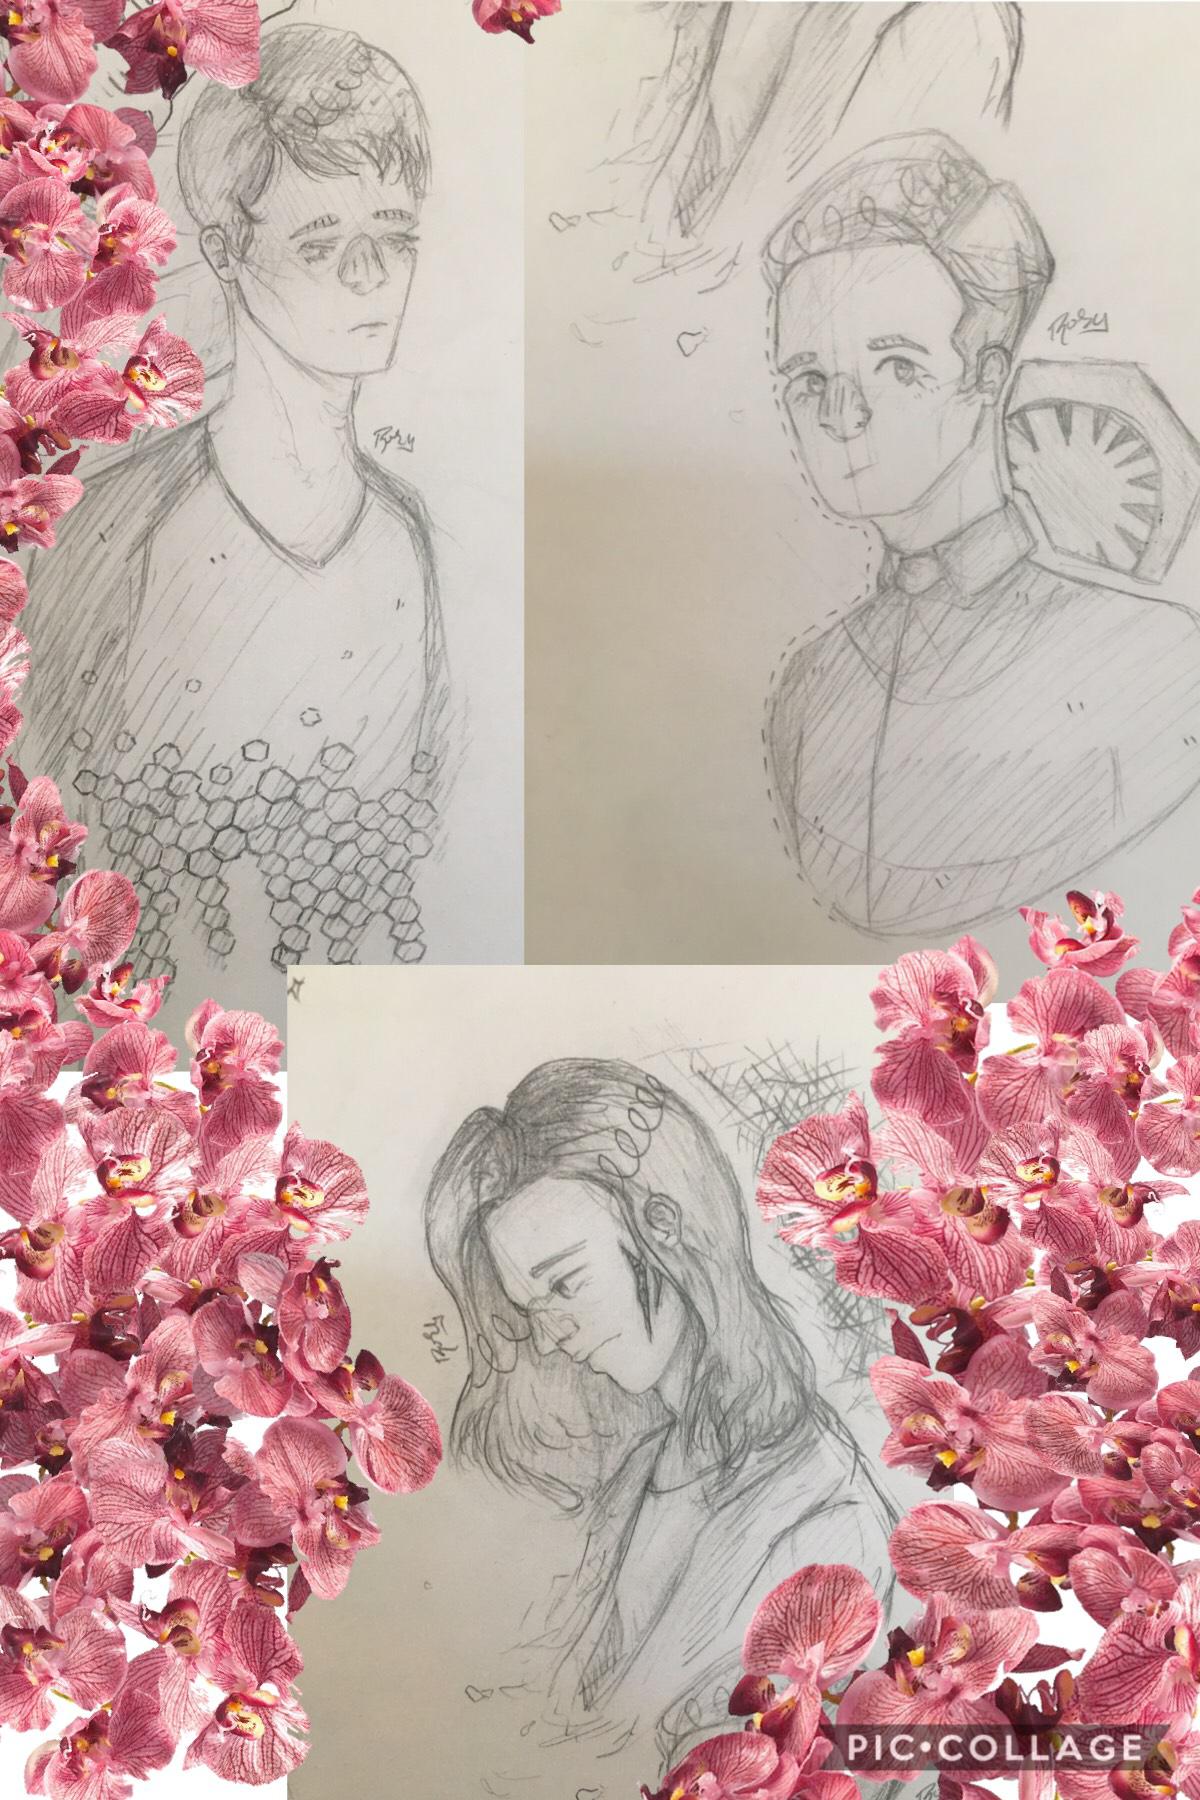 i have drawn too many domhnall gleeson characters over the past few months and it takes up an absurd amount of my sketchbook, these were all done a few months ago and there are flowers i got off of google images to hide shiТ I don't need y'all seeing or j